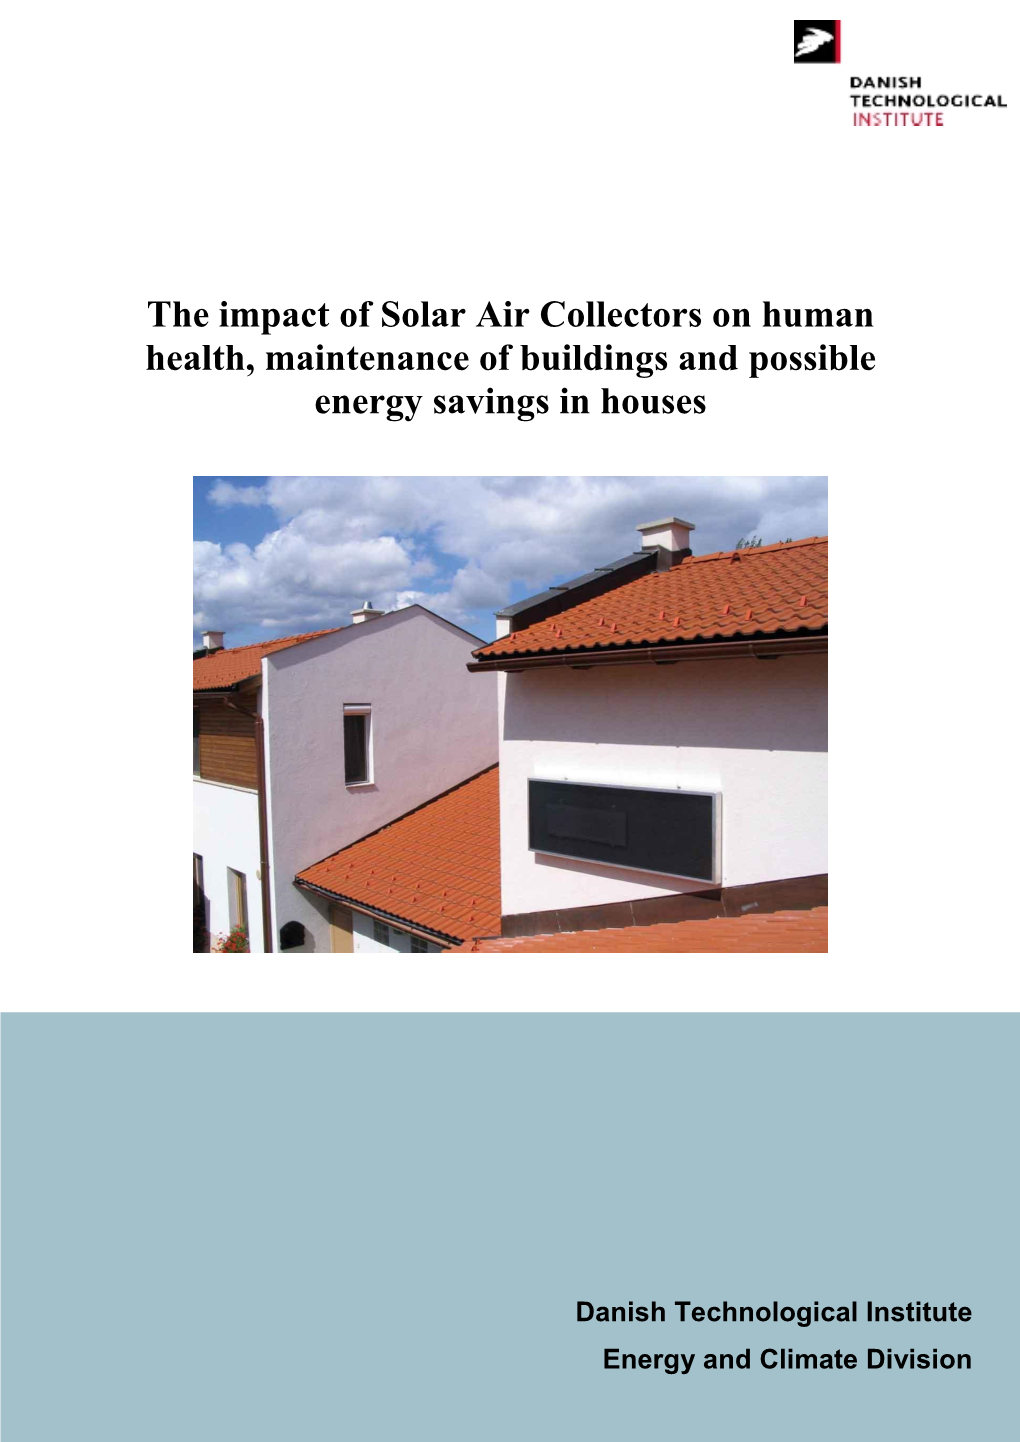 The Impact of Solar Air Collectors on Human Health, Maintenance of Buildings and Possible Energy Savings in Houses